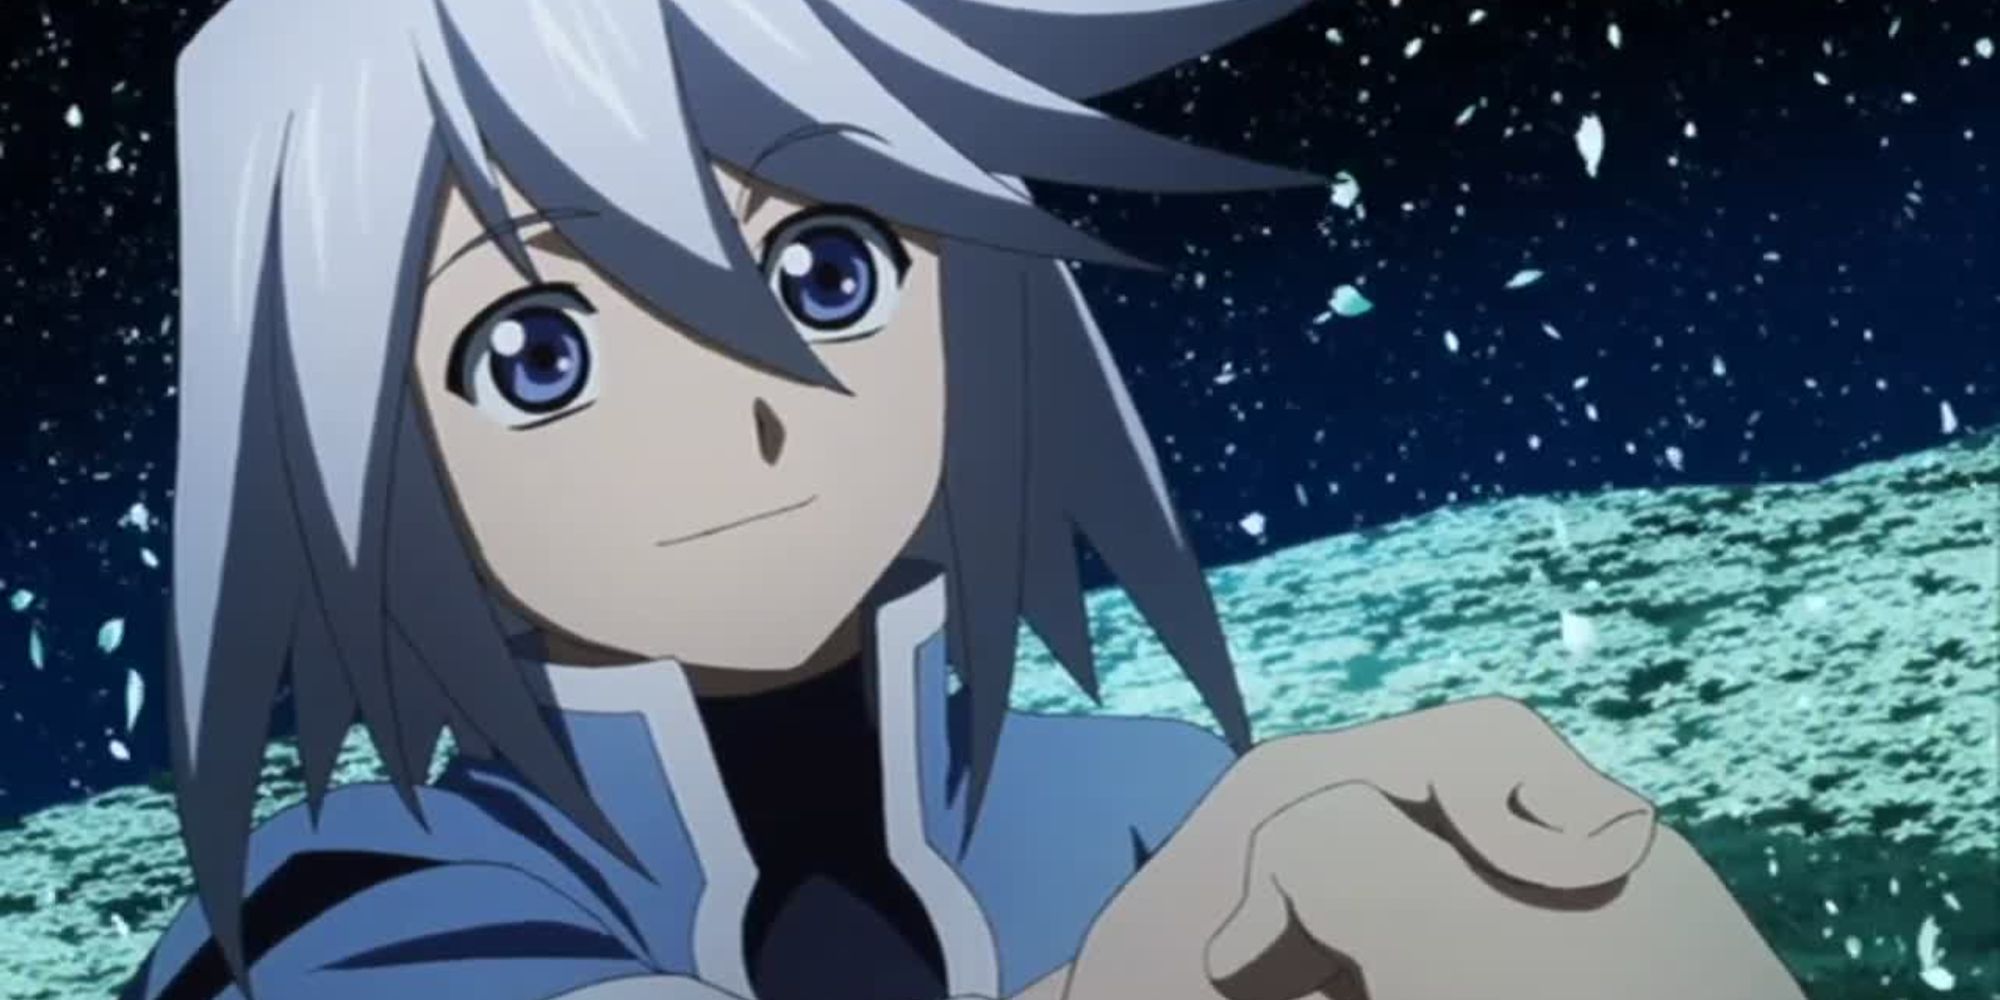 An image of Genis from Tales of Symphonia Remastered, holding onto someone's hand in a field of white flowers underneath a starry, night sky.